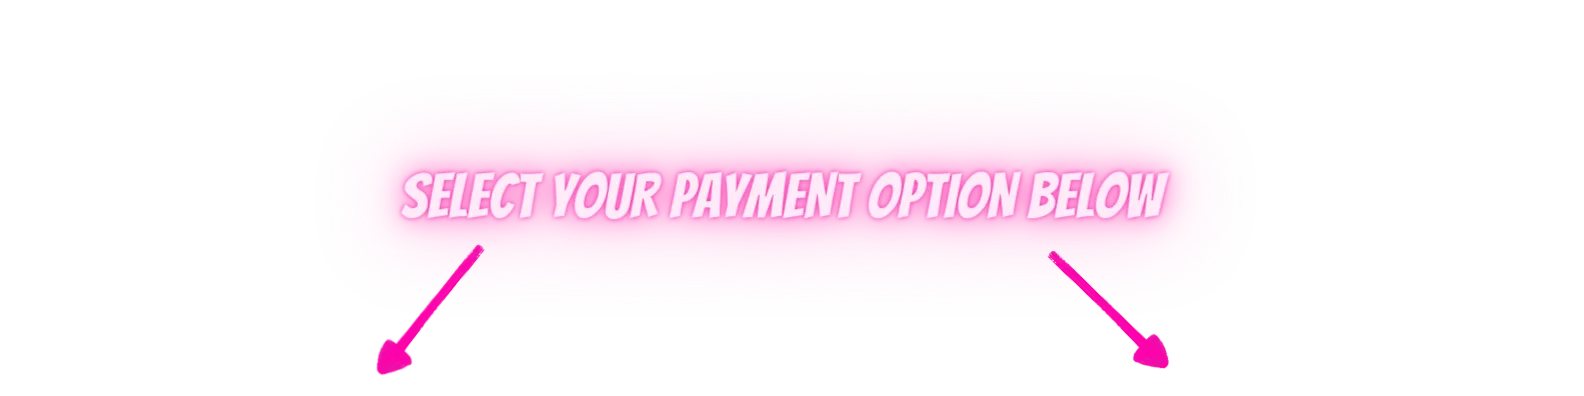 payment option icon